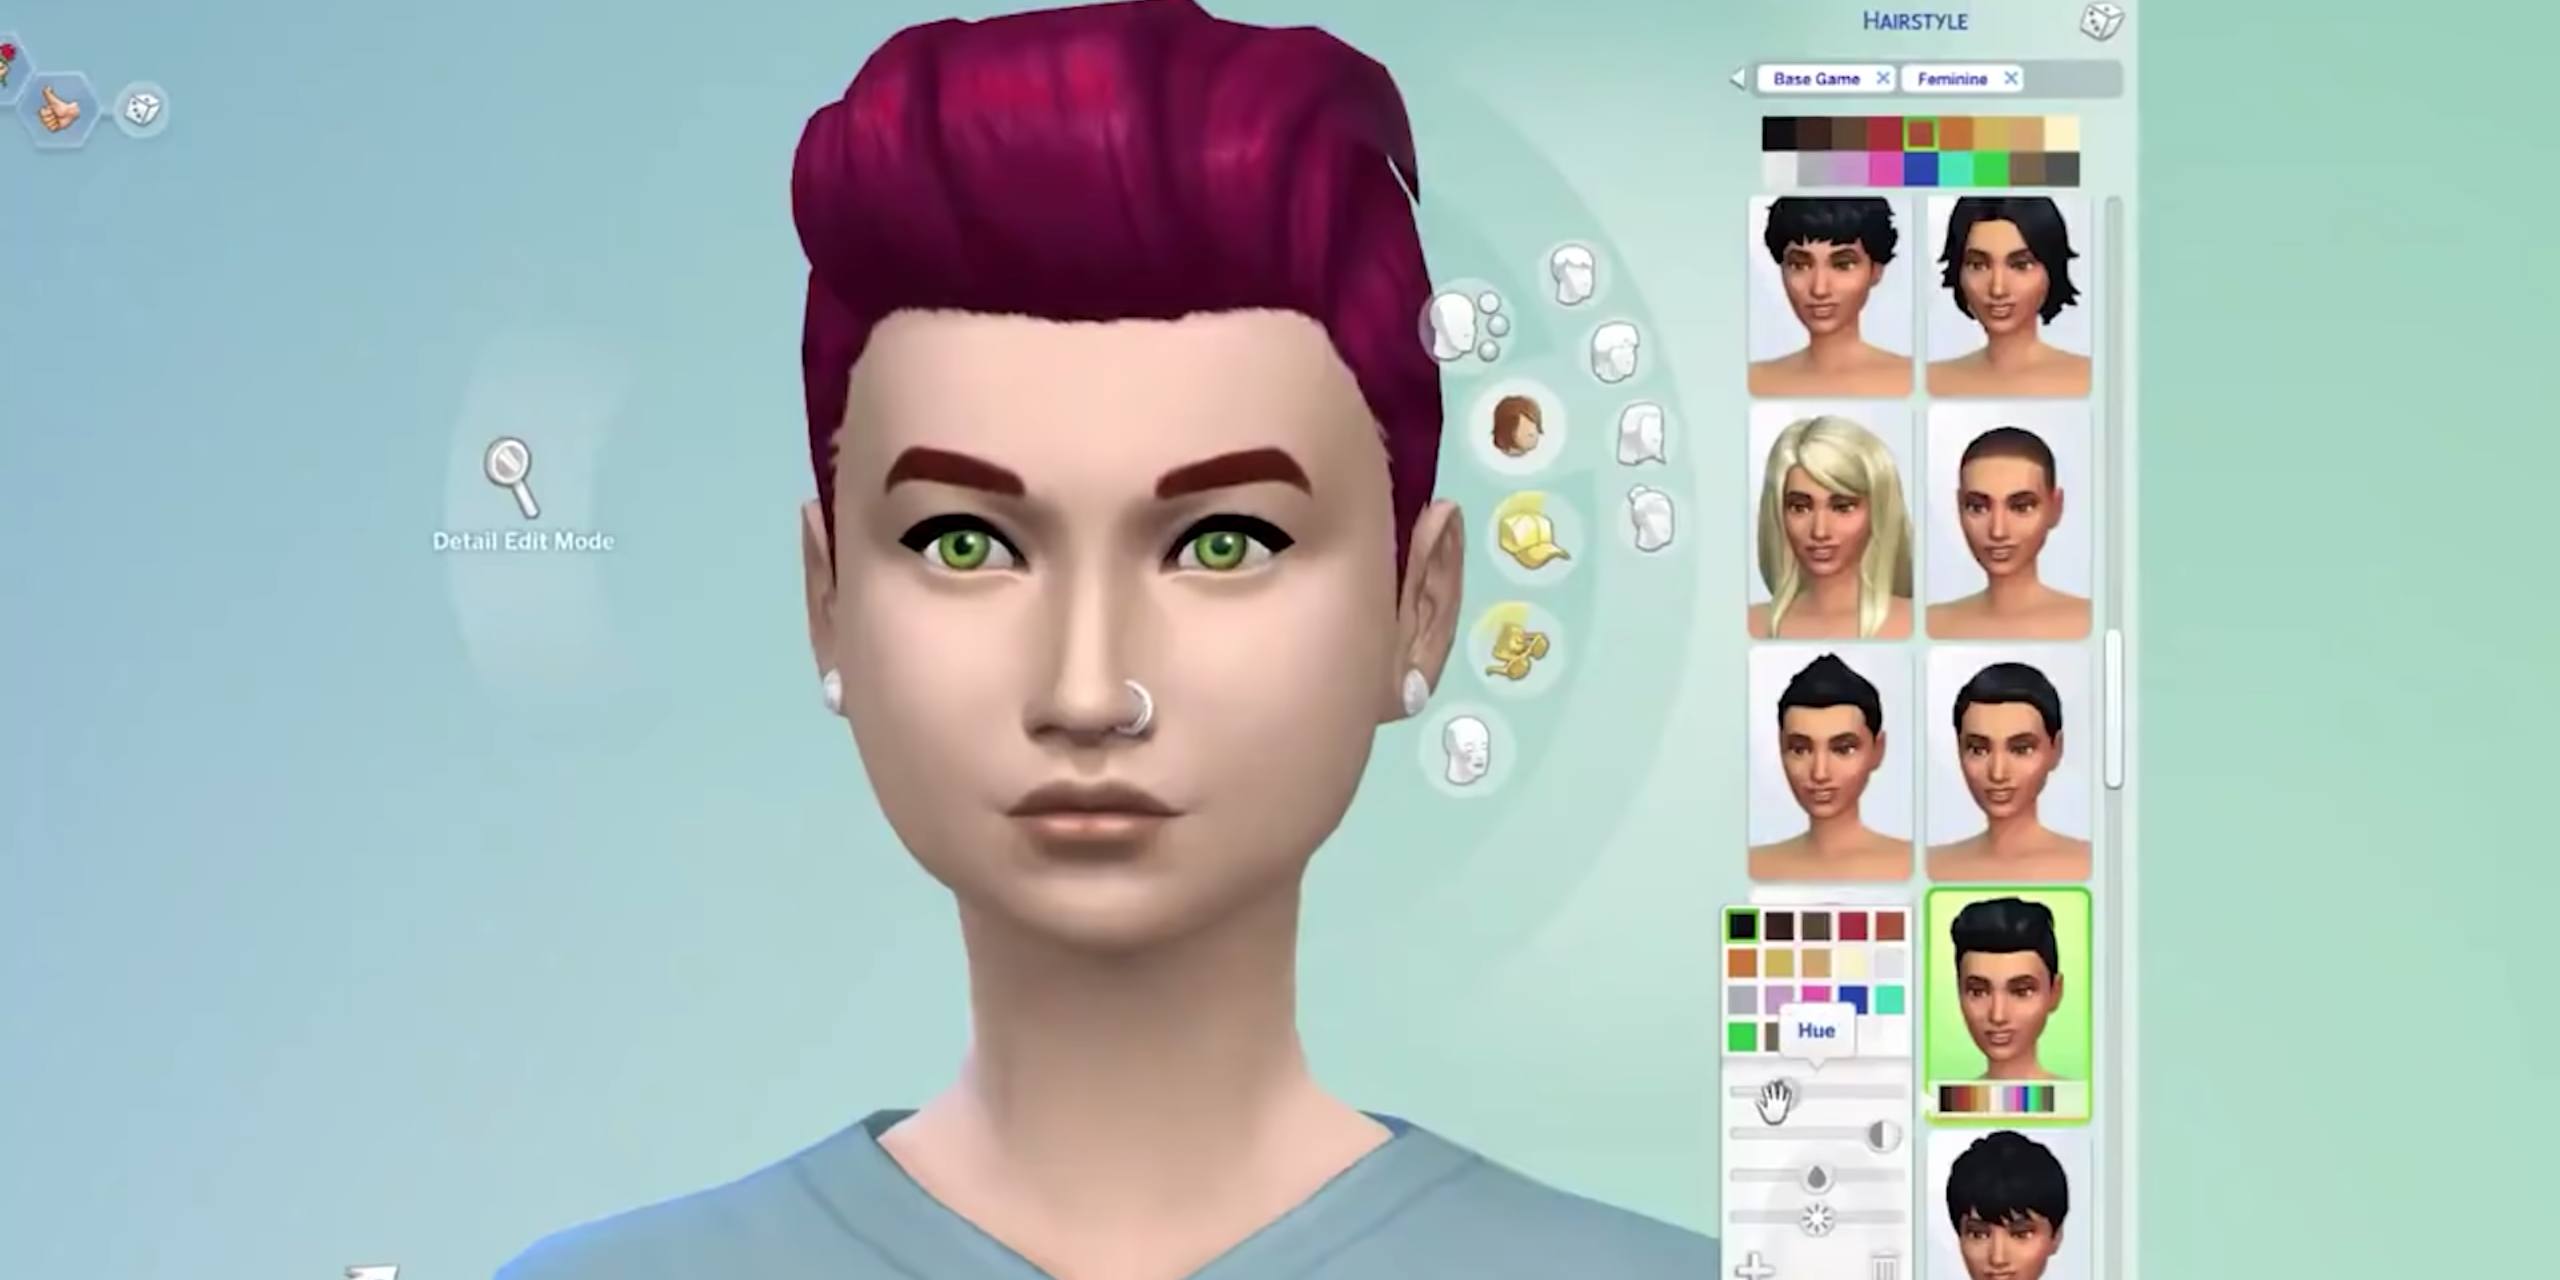 sims 3 into the future hair